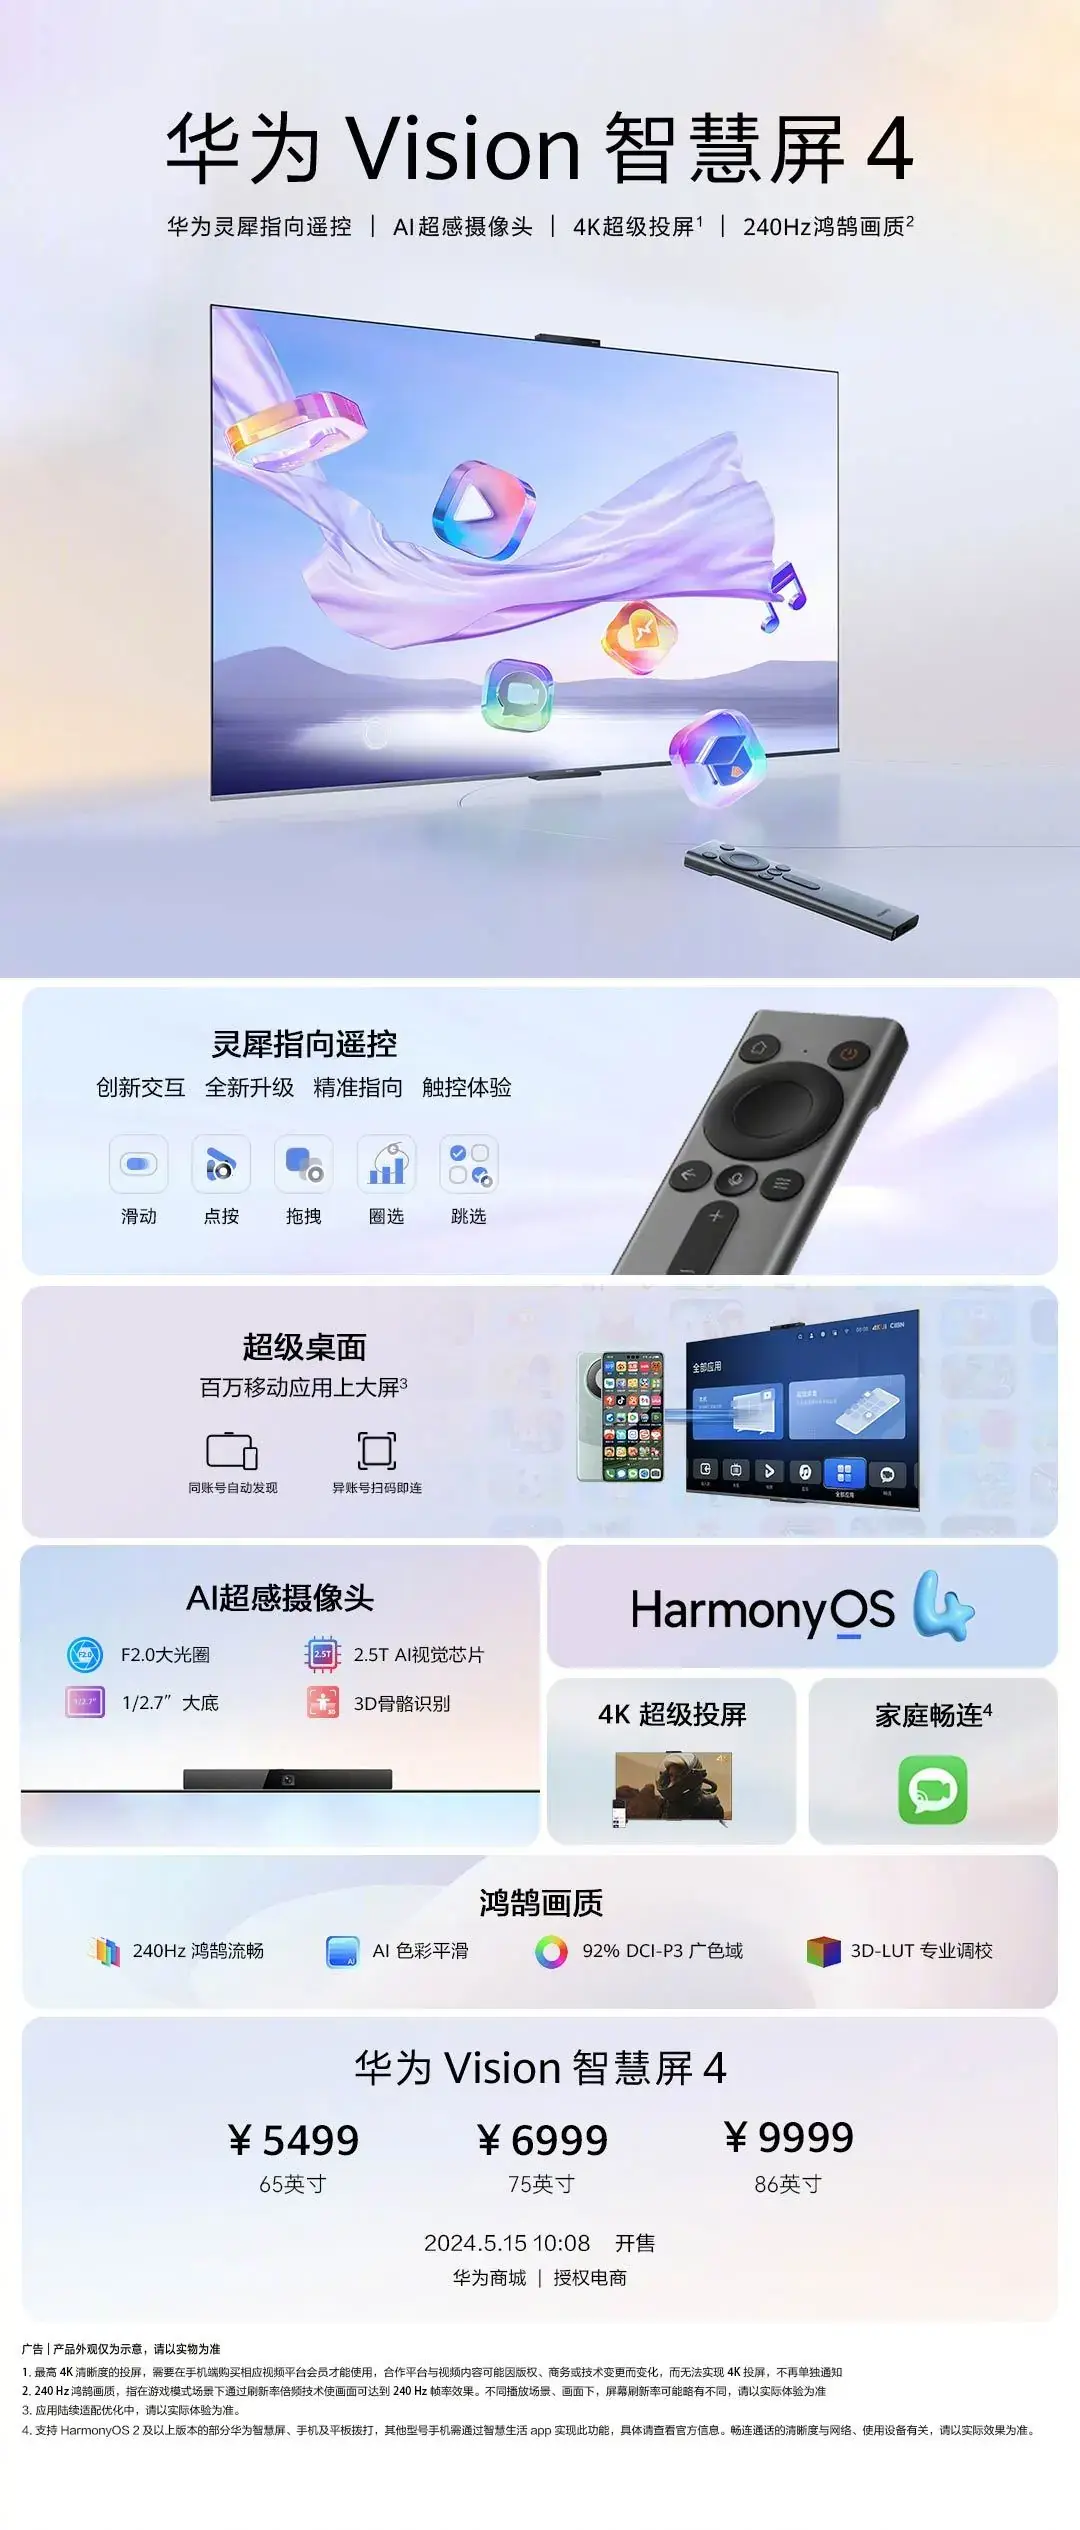 The Vision Smart Screen 4 is integrated perfectly with Huawei's Link Pointing Remote Control